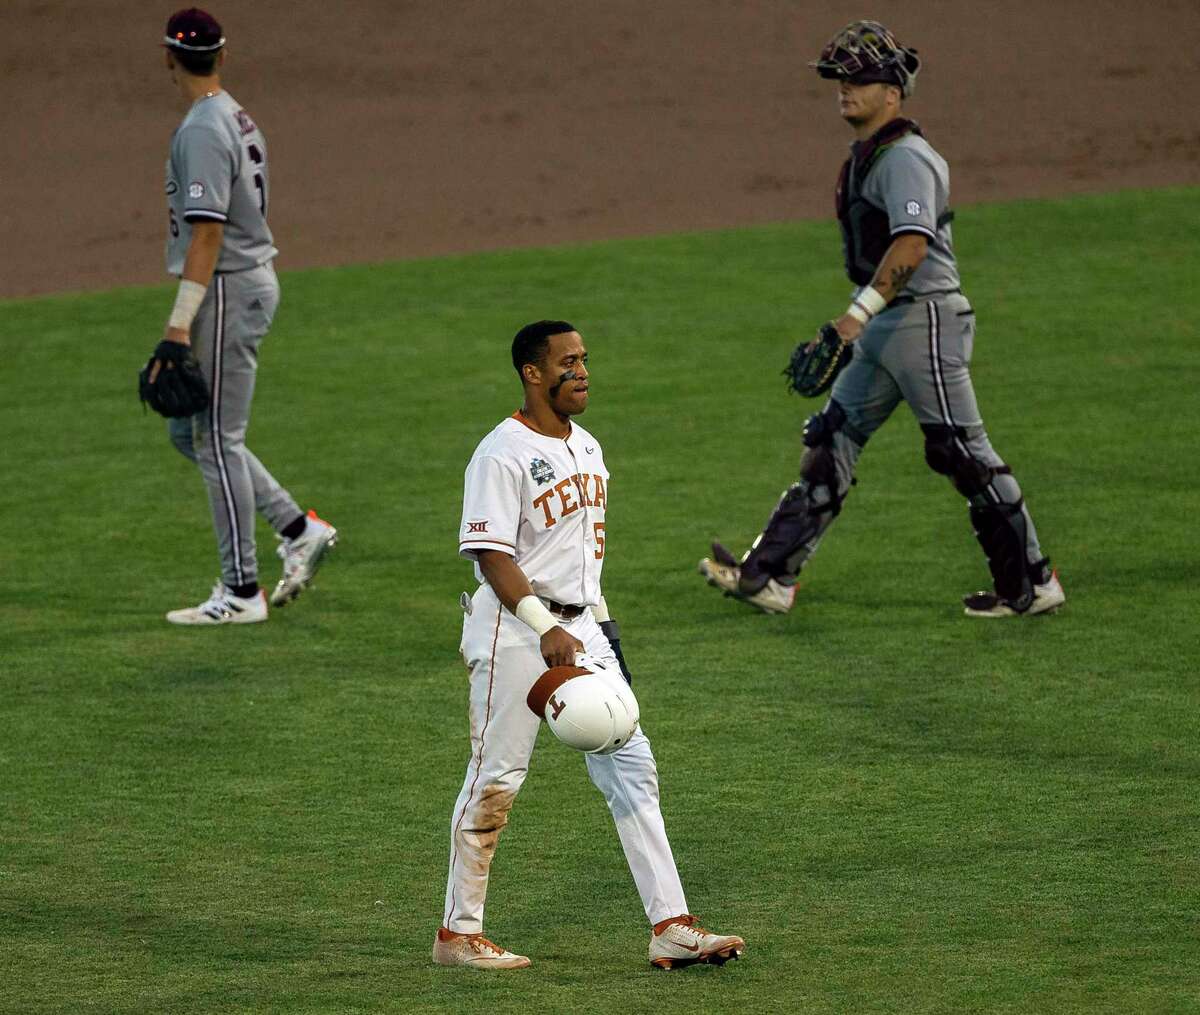 Texas' Camryn Williams (55) walks across the infield after the loss to Mississippi State in a baseball game in the College World Series, Sunday, June 20, 2021, at TD Ameritrade Park in Omaha, Neb. (AP Photo/John Peterson)